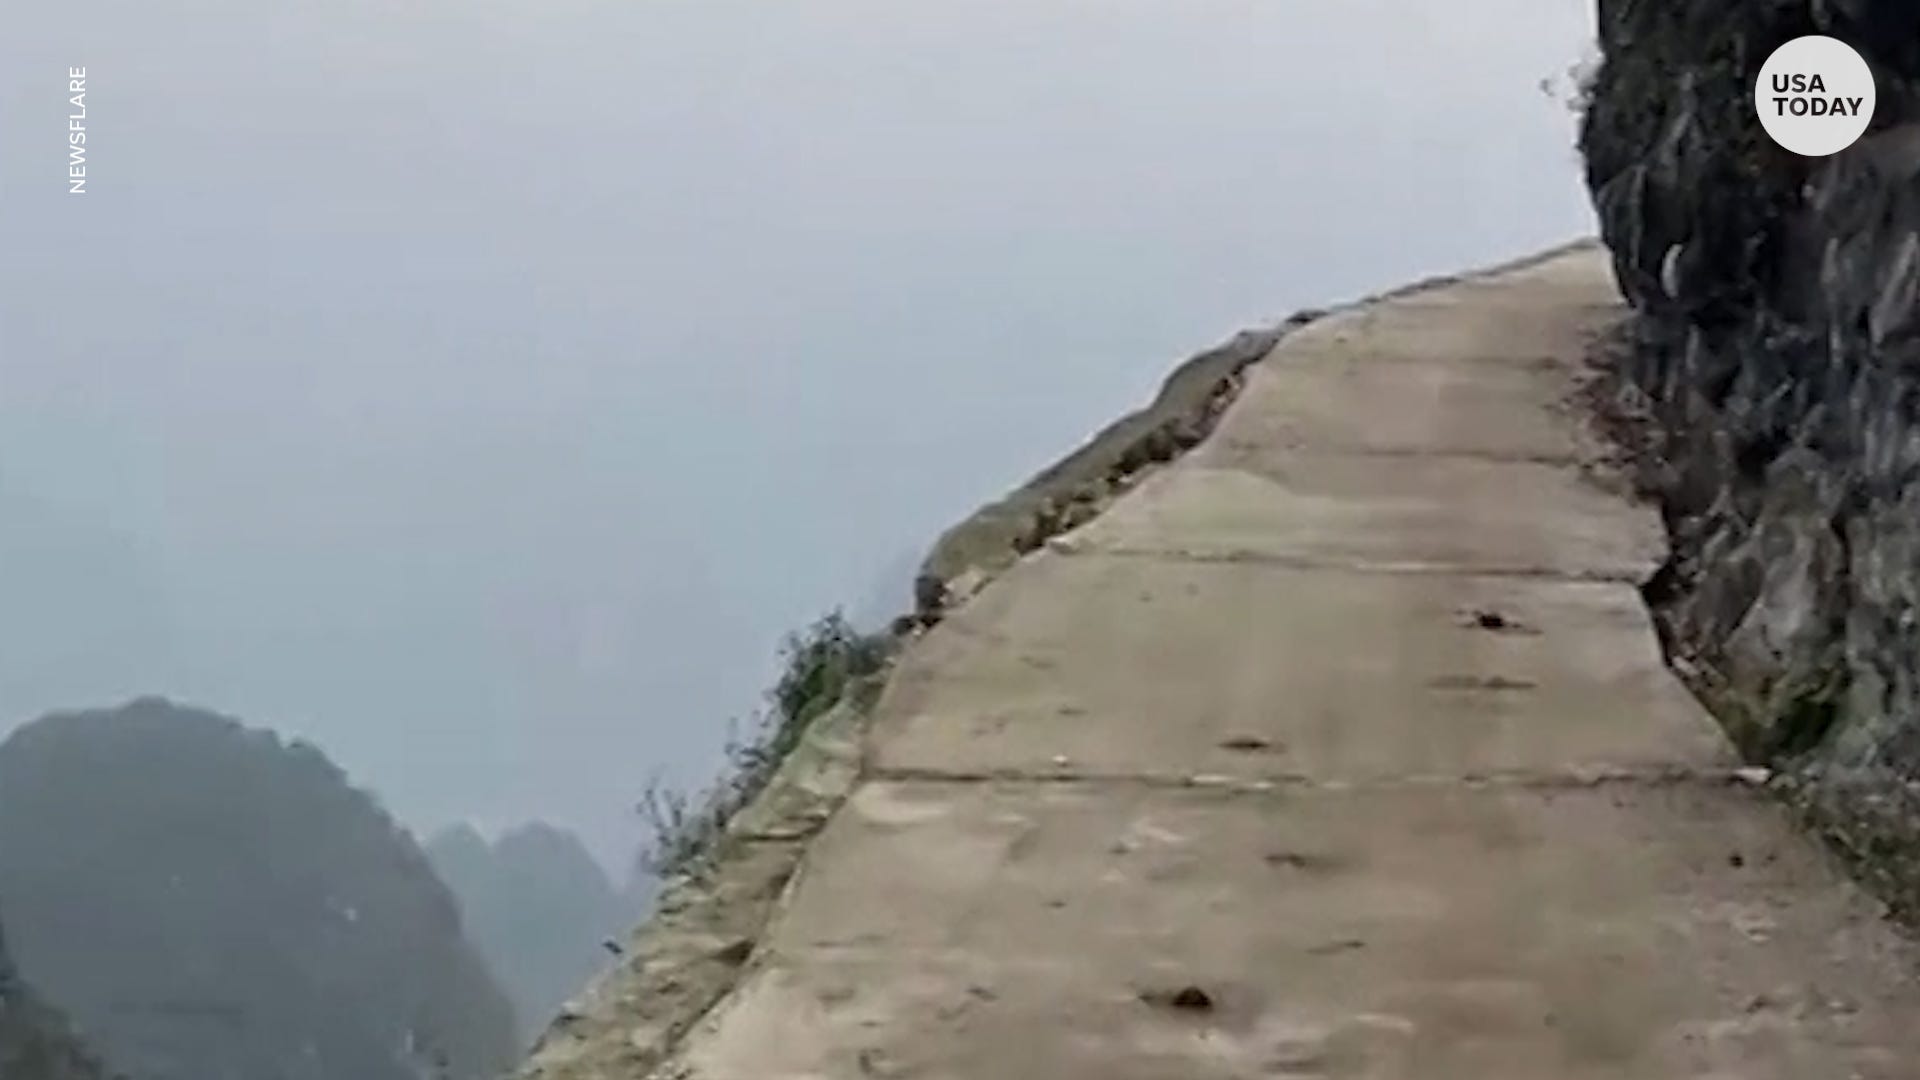 Are you brave enough to drive along this terrifyingly dangerous road?